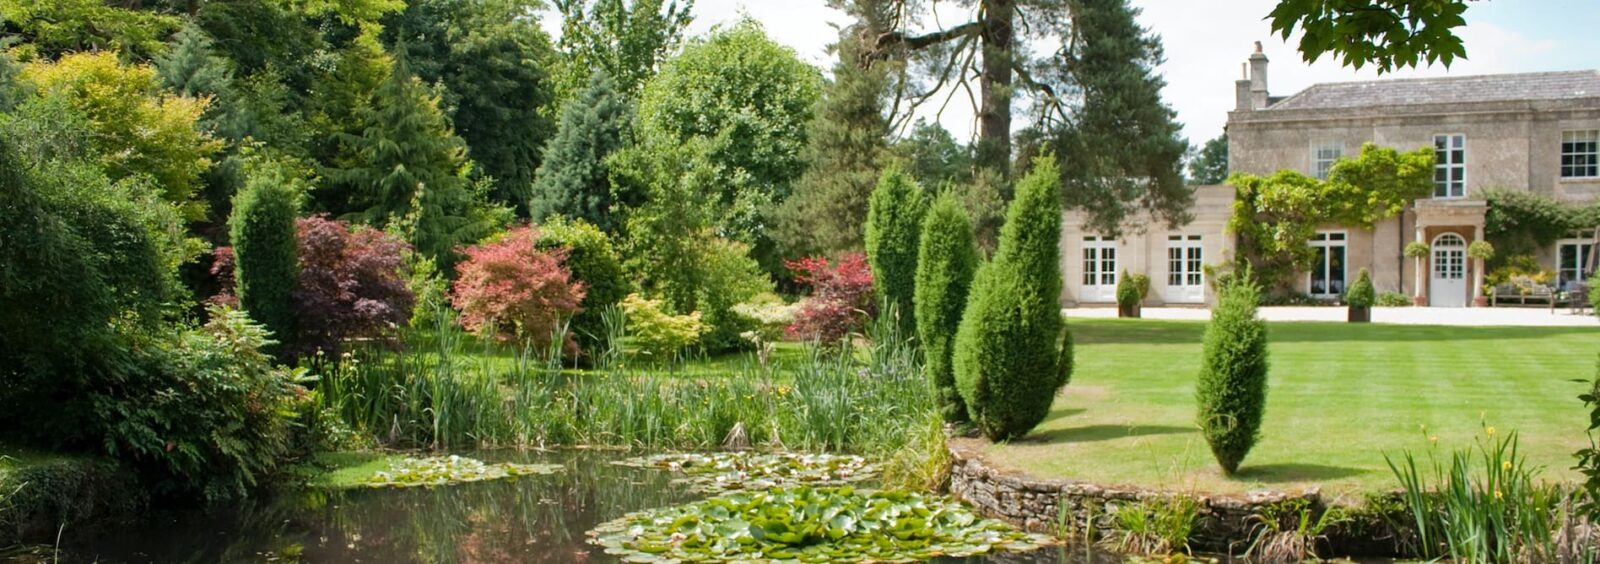 Pond, gardens and main country house at Guyers House Hotel & Restaurant